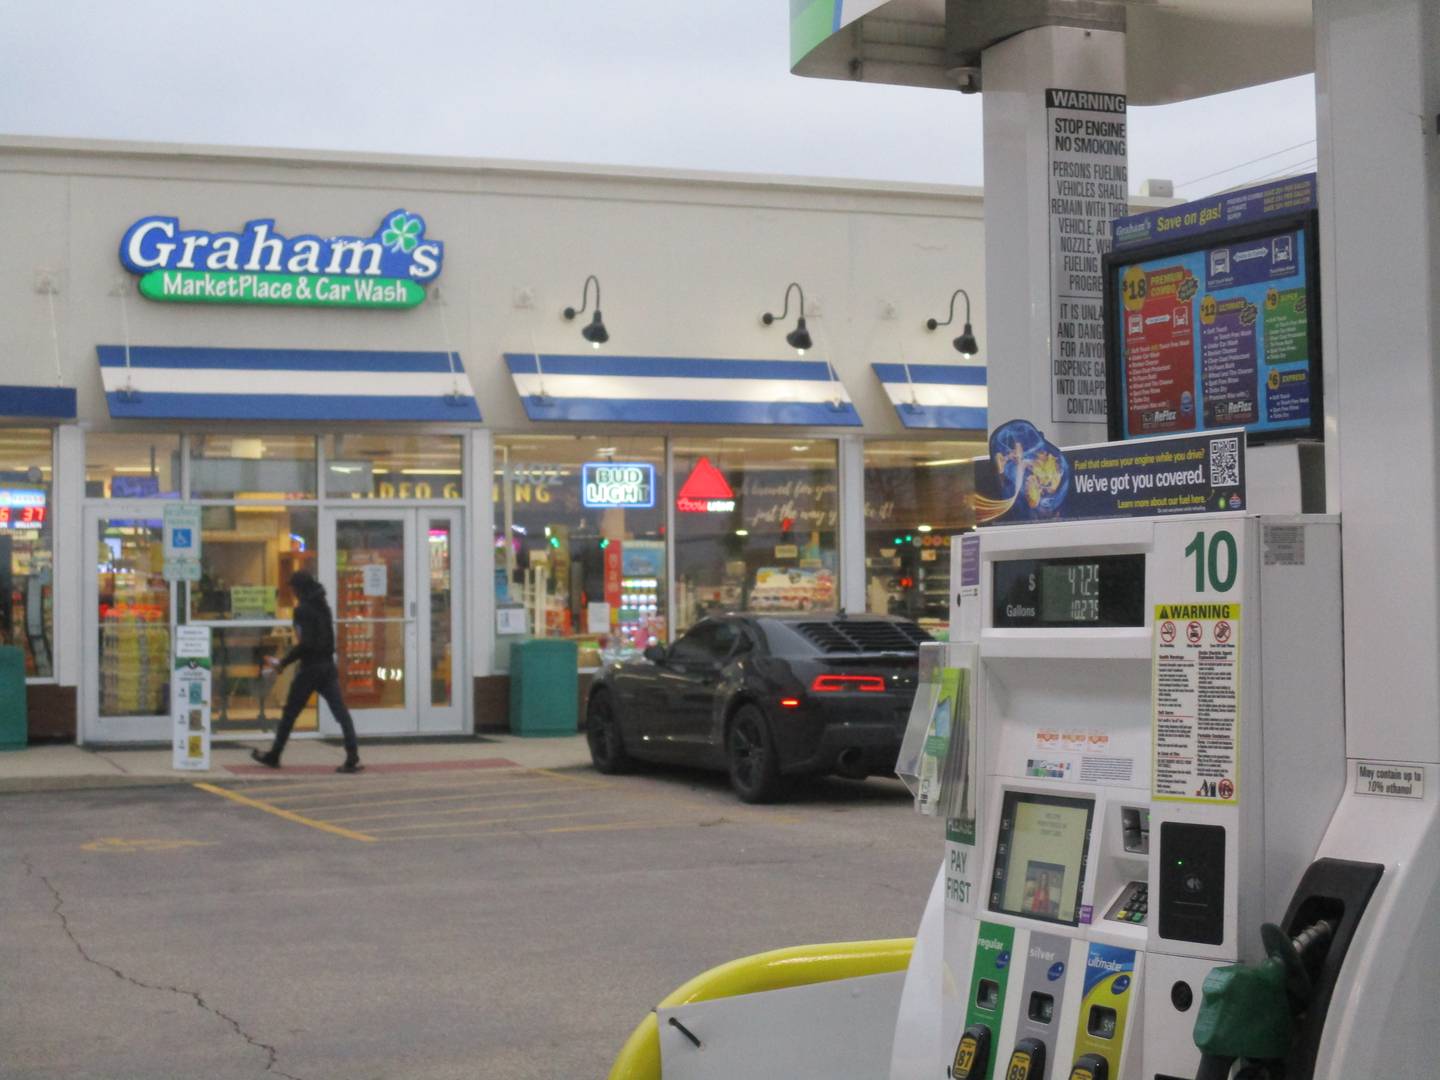 Graham's Marketplace and Car Wash, which operates this gas station and convenience store at the northeast corner of Routes 34 and 47, is planning a new location at the northeast corner of Routes 71 and 47. (Mark Foster -- mfoster @shawmedia.com)